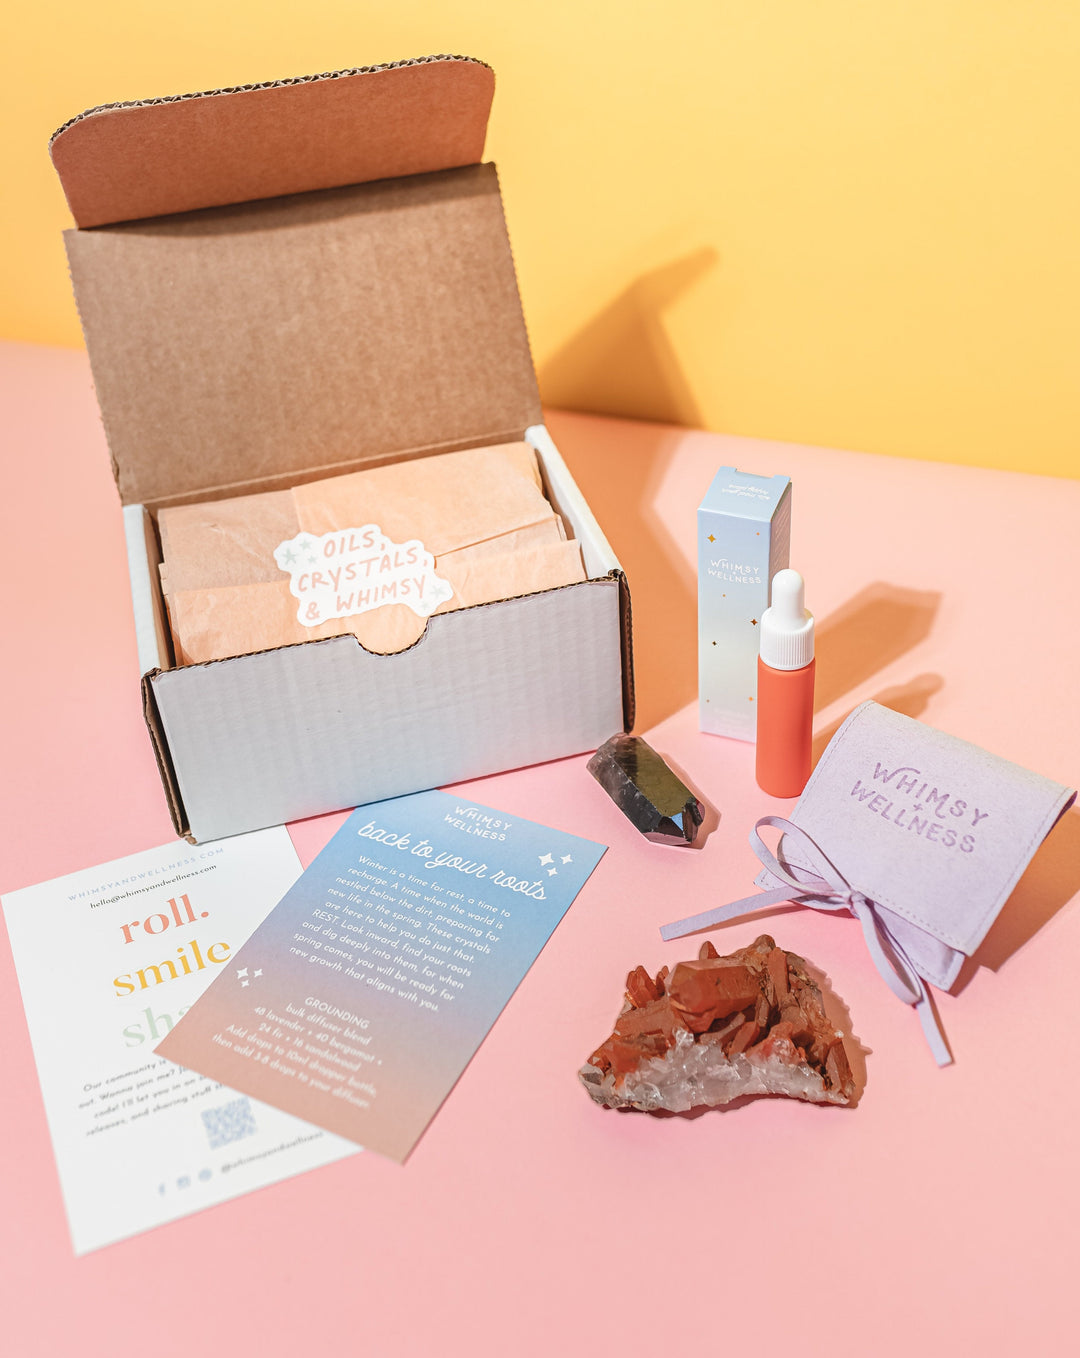 Prepaid Crystal Subscription Box | 6 Months (2 boxes)